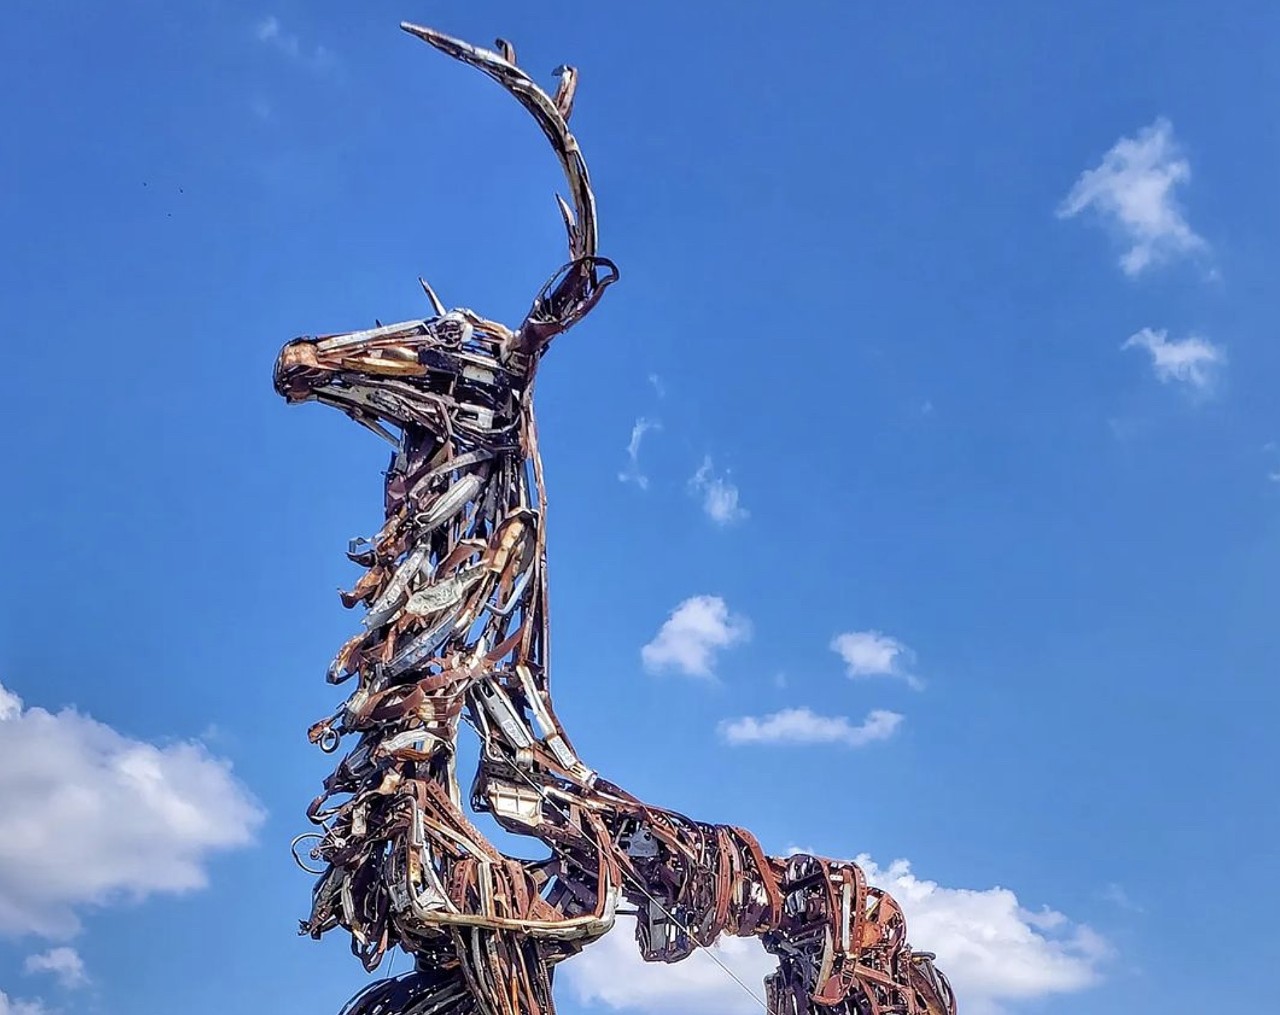 Giant Stag Made of Junk, Converse
4203 Loring Park, Converse, roadsideamerica.com
Built from various rusted metal parts — fenders and typewriters included — this Florentino Narcis creation stands 40 feet tall in the midst of a neighborhood in Converse.
Photo via Instagram / therefinedhomellc